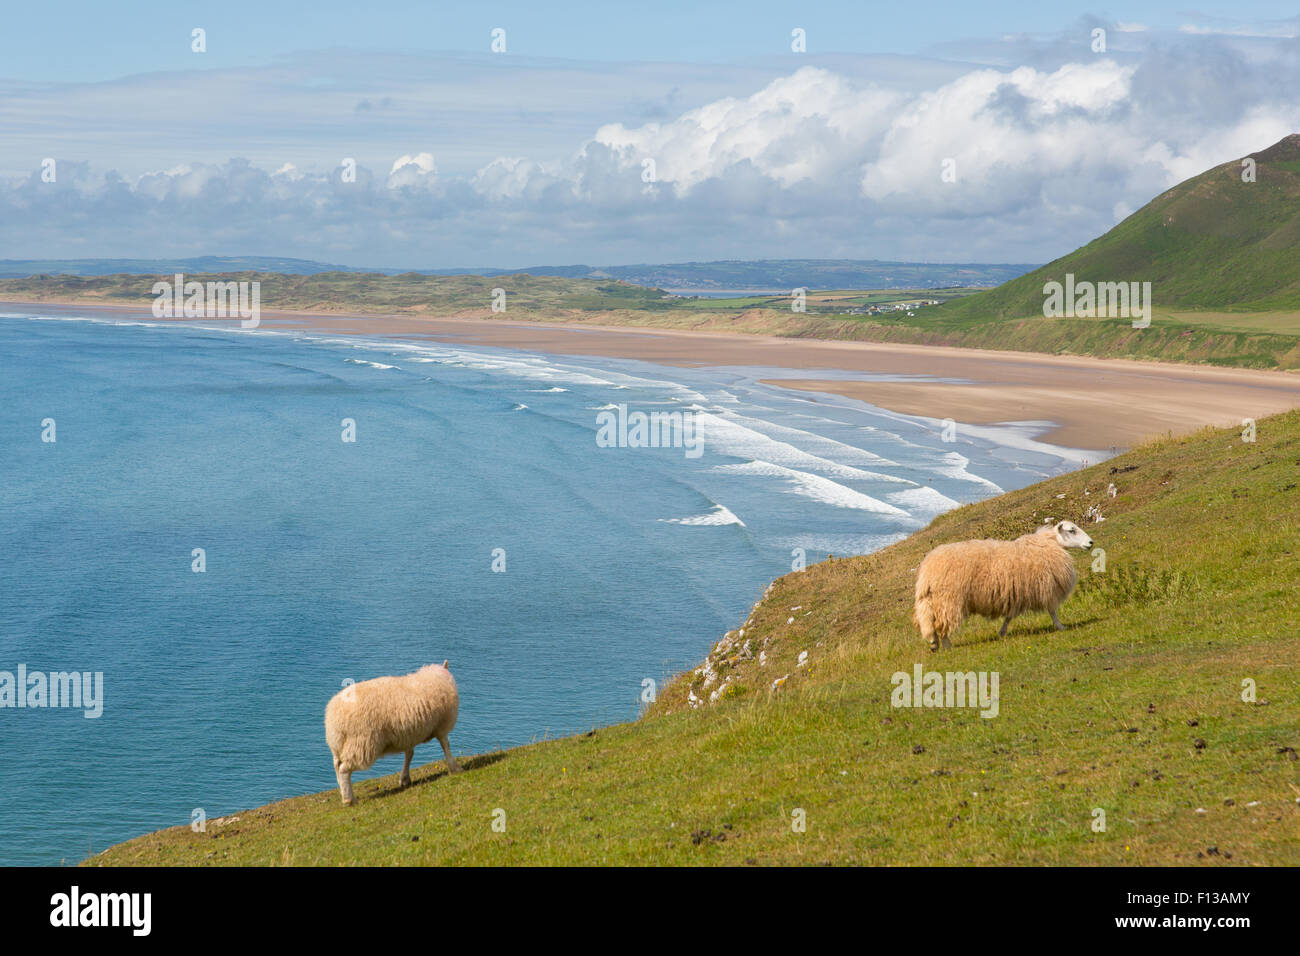 Welsh sheep Rhossili beach The Gower peninsula South Wales coast one of the best beaches in the UK in summer with blue sky Stock Photo